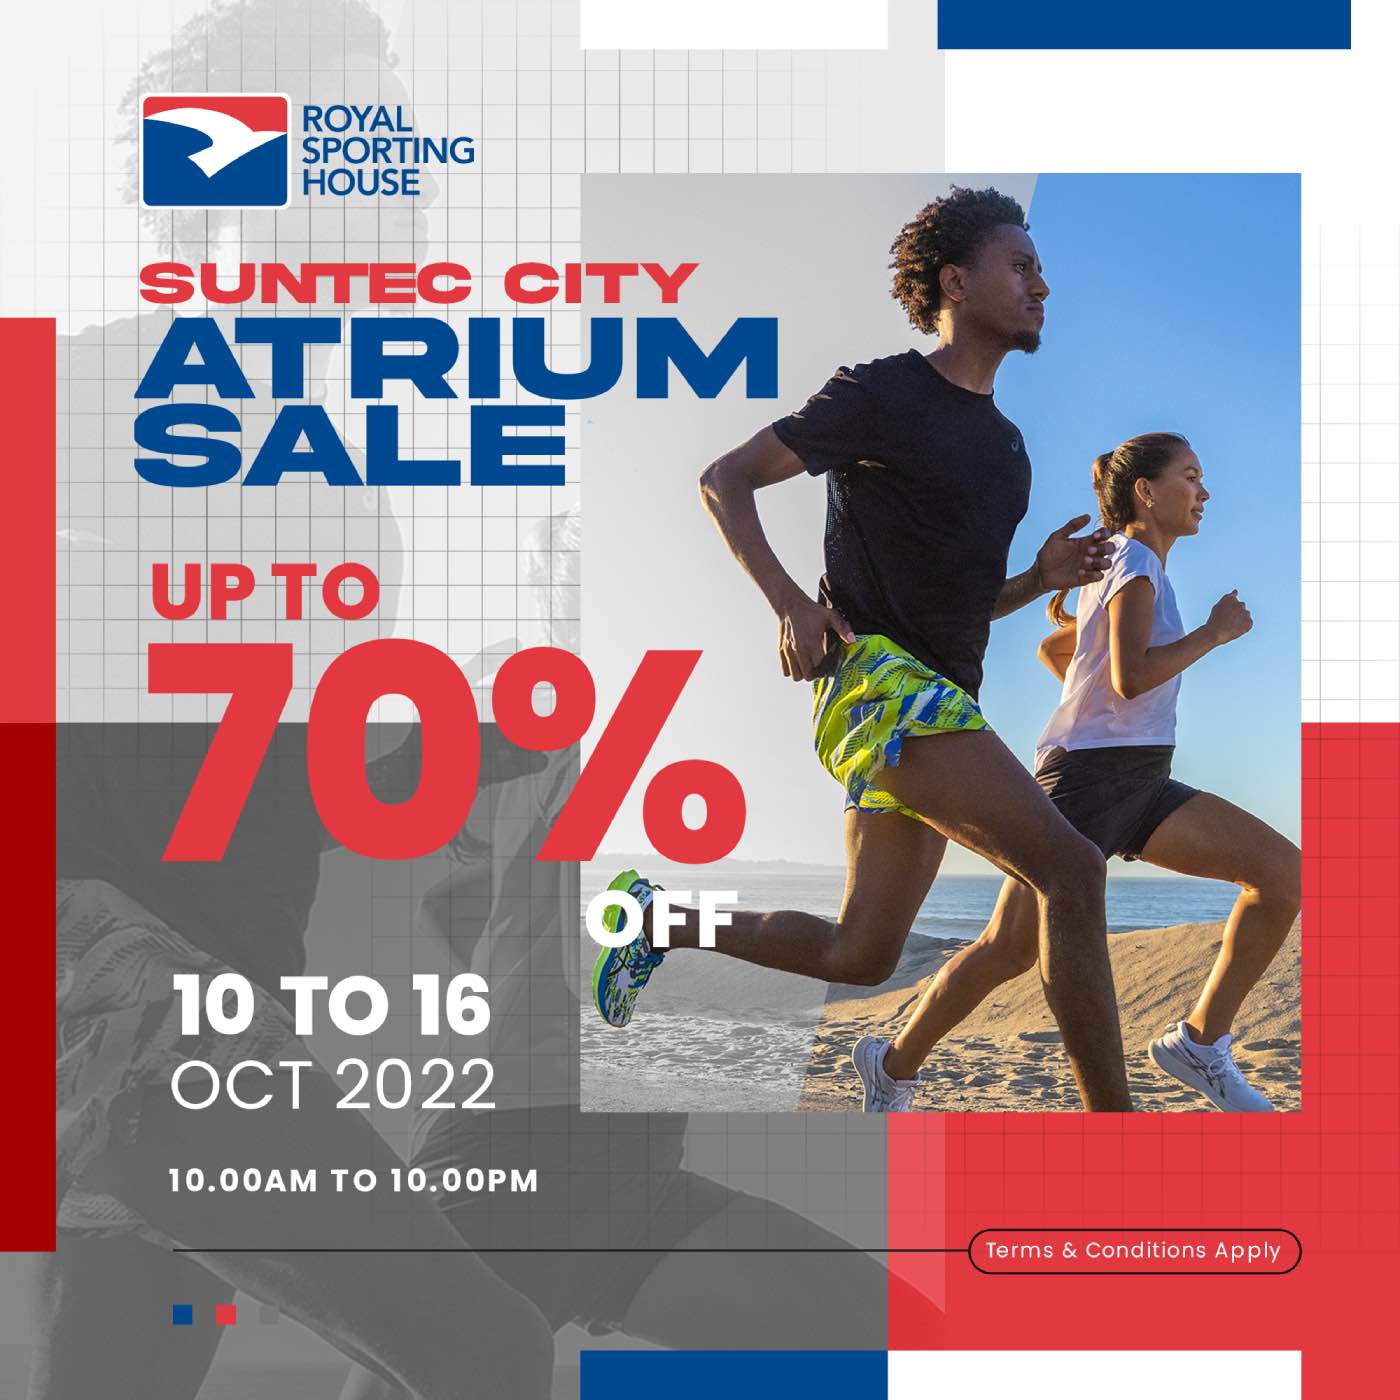 Royal Sporting House promo - 70% OFF